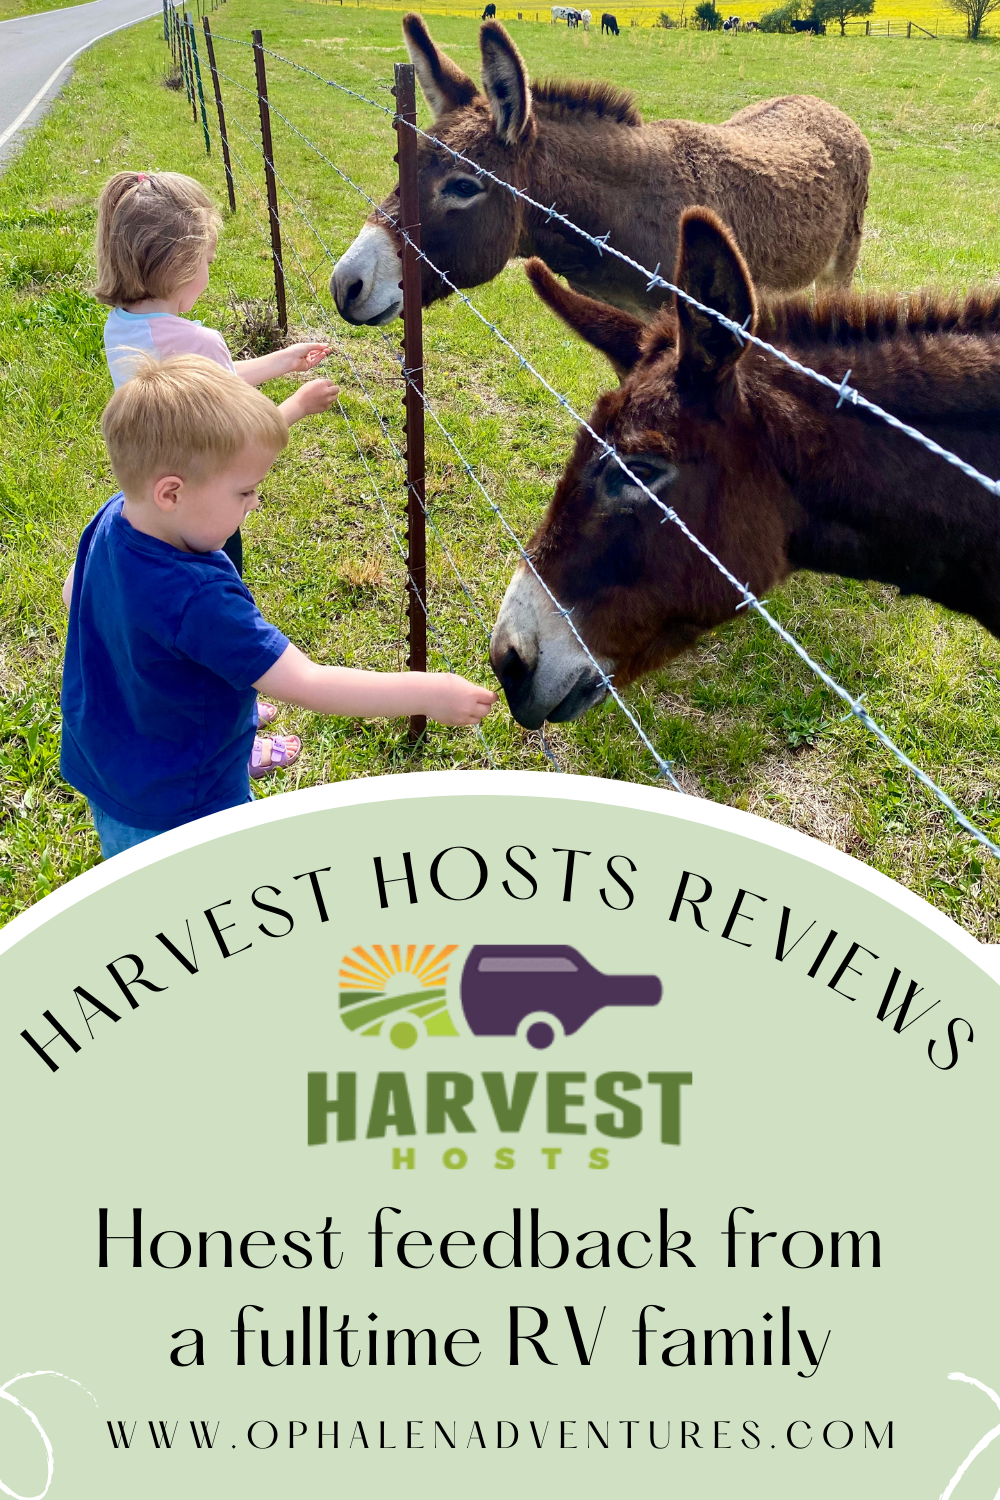 Harvest Hosts Reviews: Authentic Feedback from A Fulltime Family